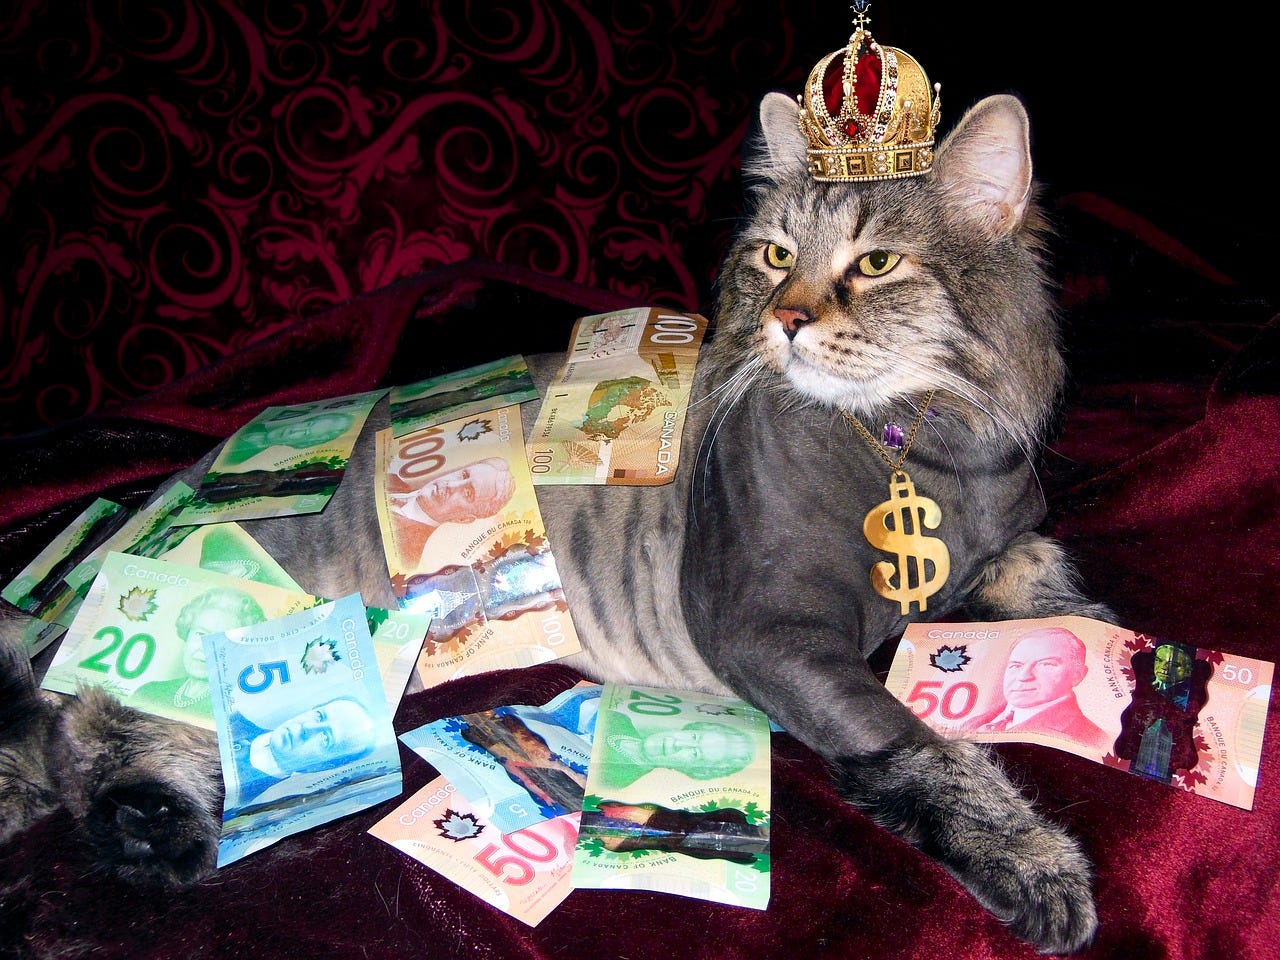 Handsome cat covered in colourful Canadian money. Unfortunately it is neither my cat nor my money. Photo from Pixabay.